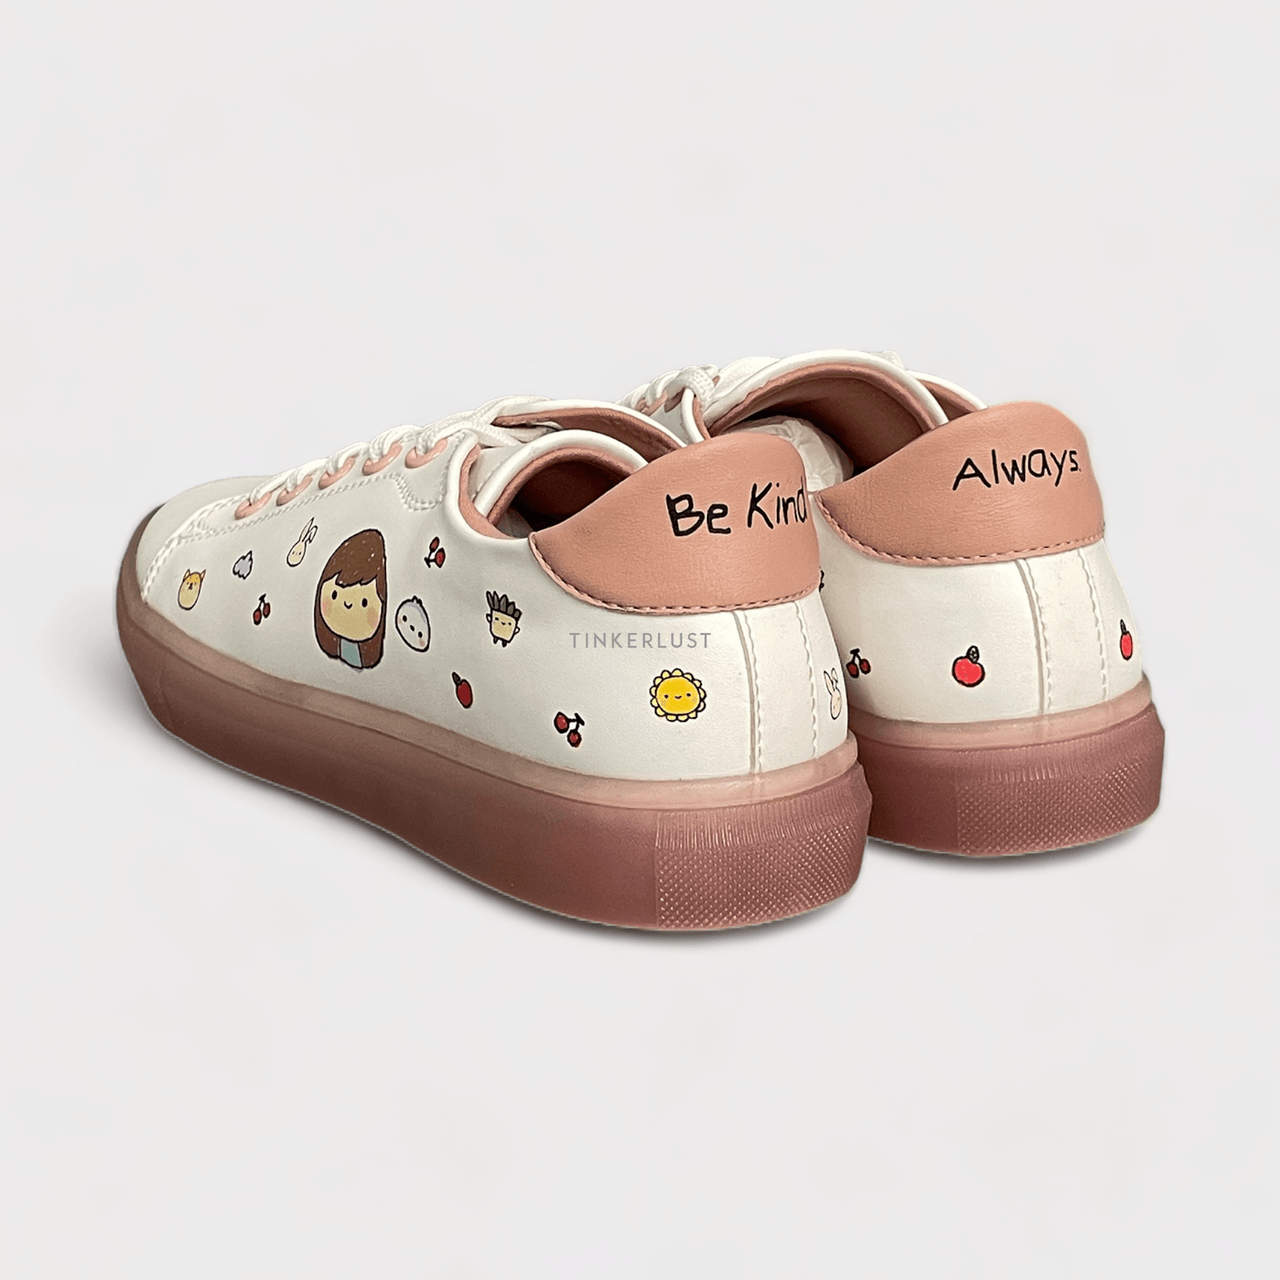 byeol x Sally Piper White & Soft Pink Sneakers